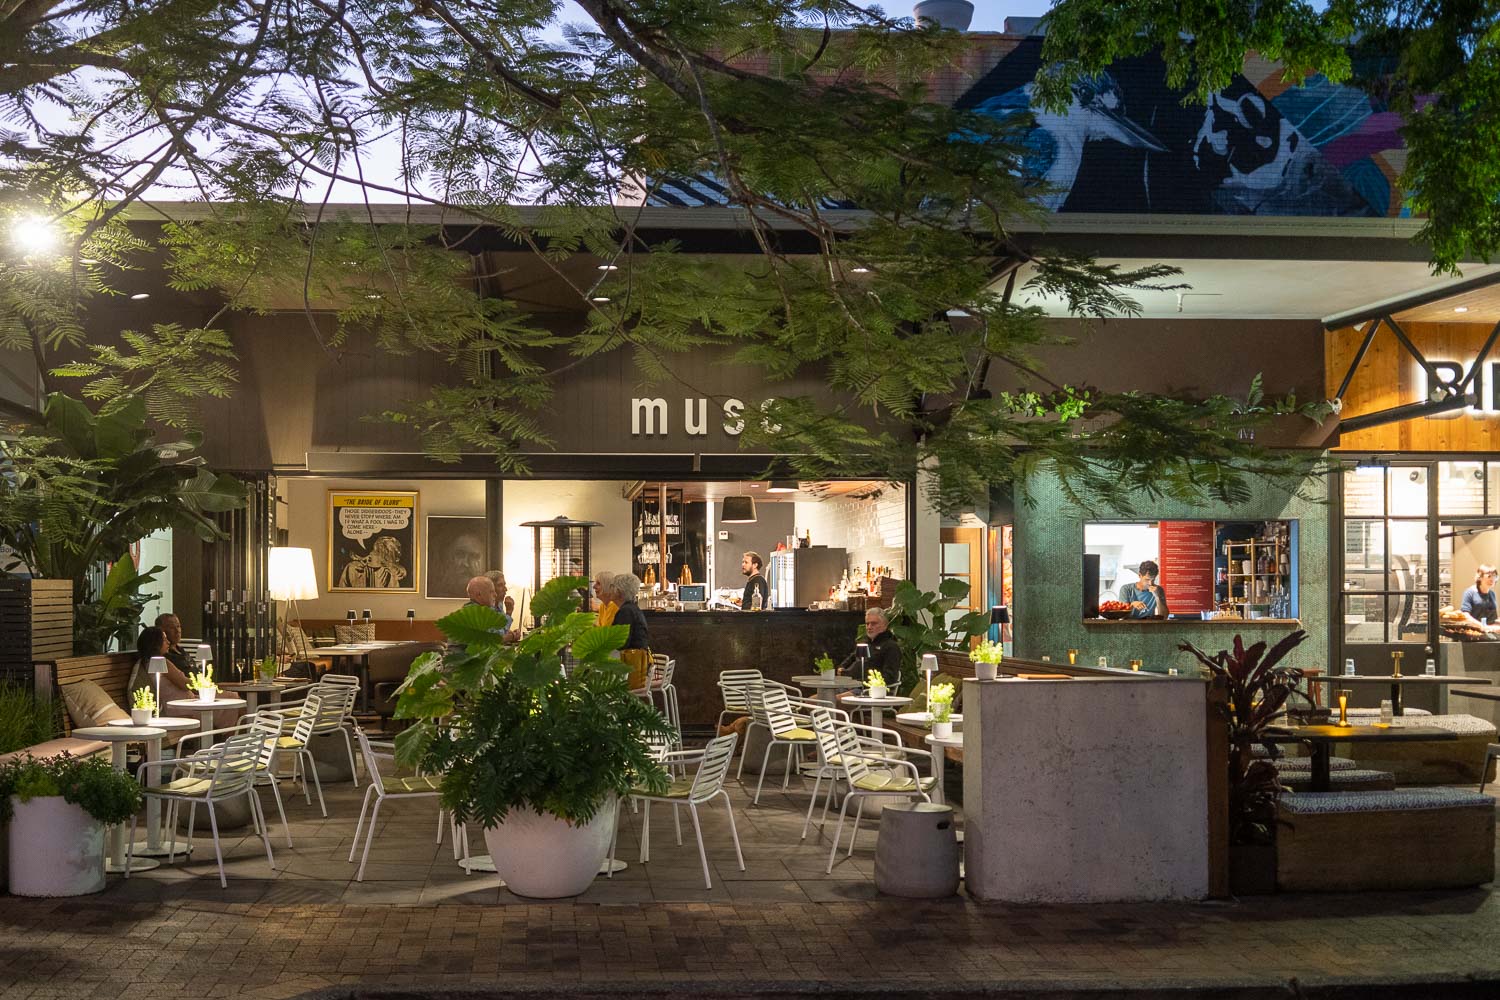 Outdoor seating outside Muse bar, Noosa, Queensland, Australia